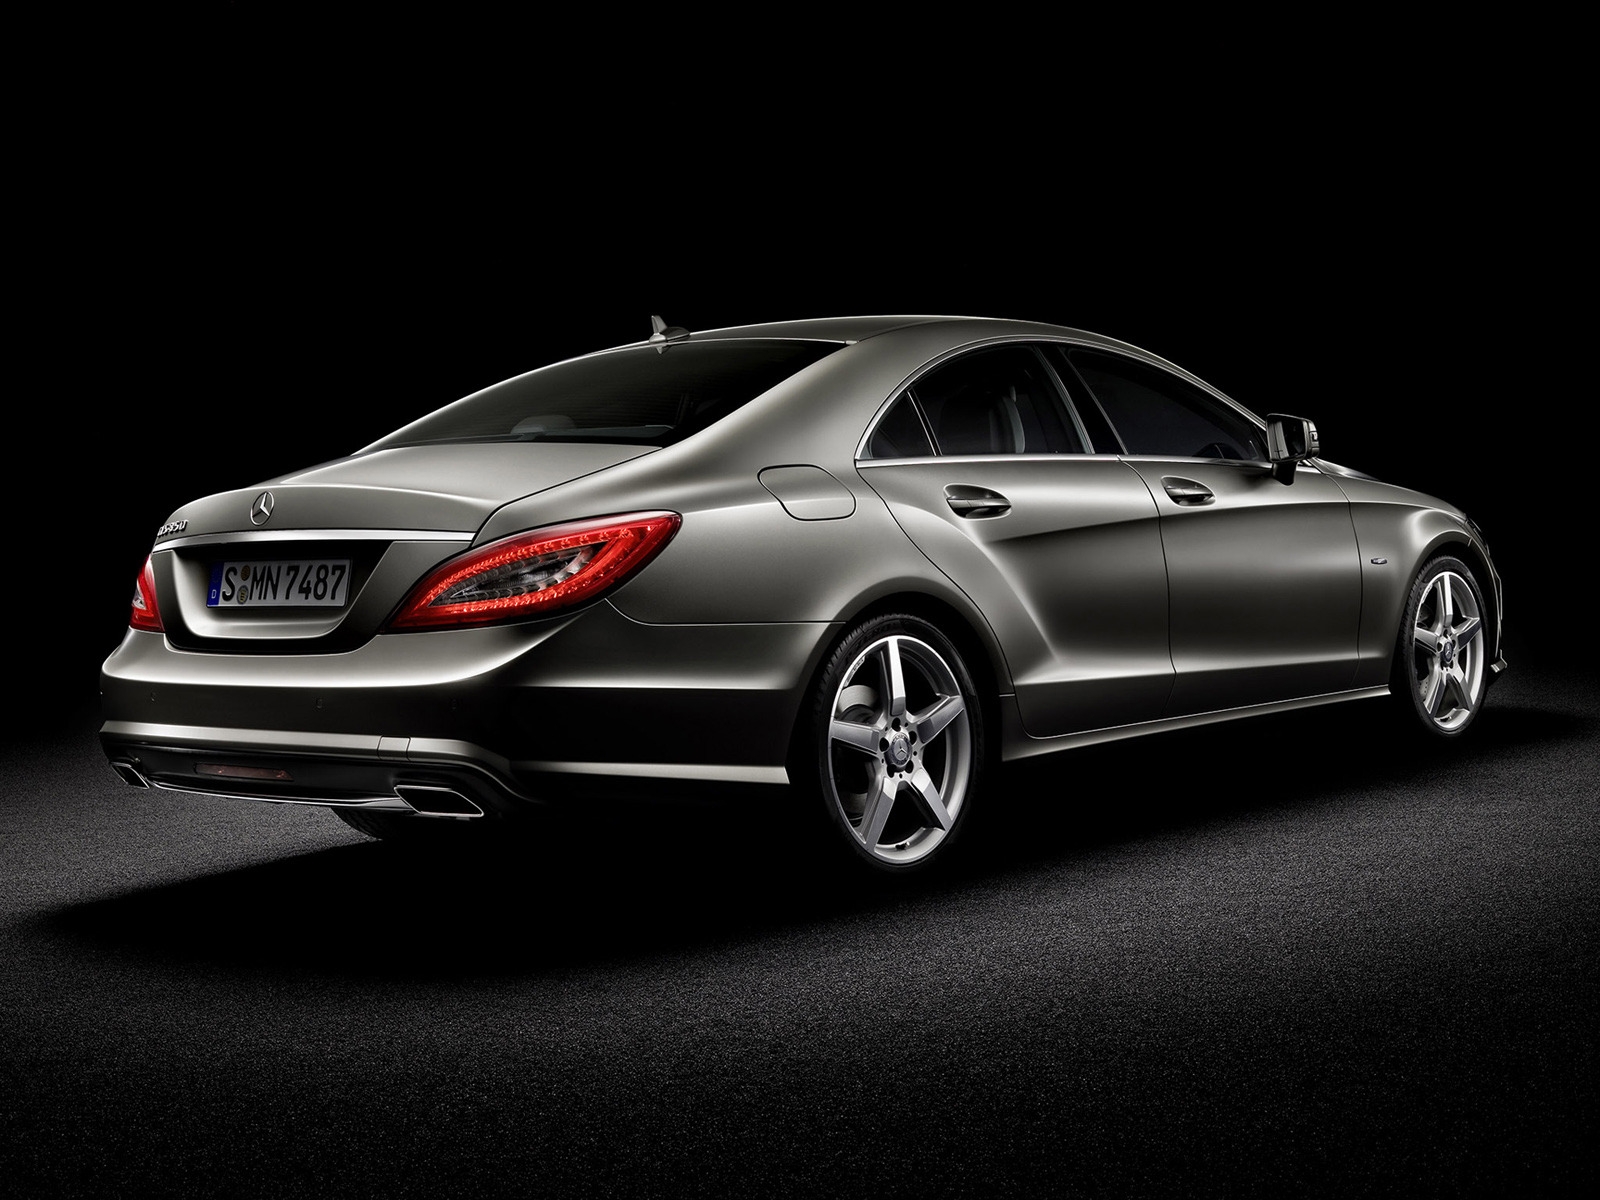 Mercedes CLS 2010 Rear for 1600 x 1200 resolution